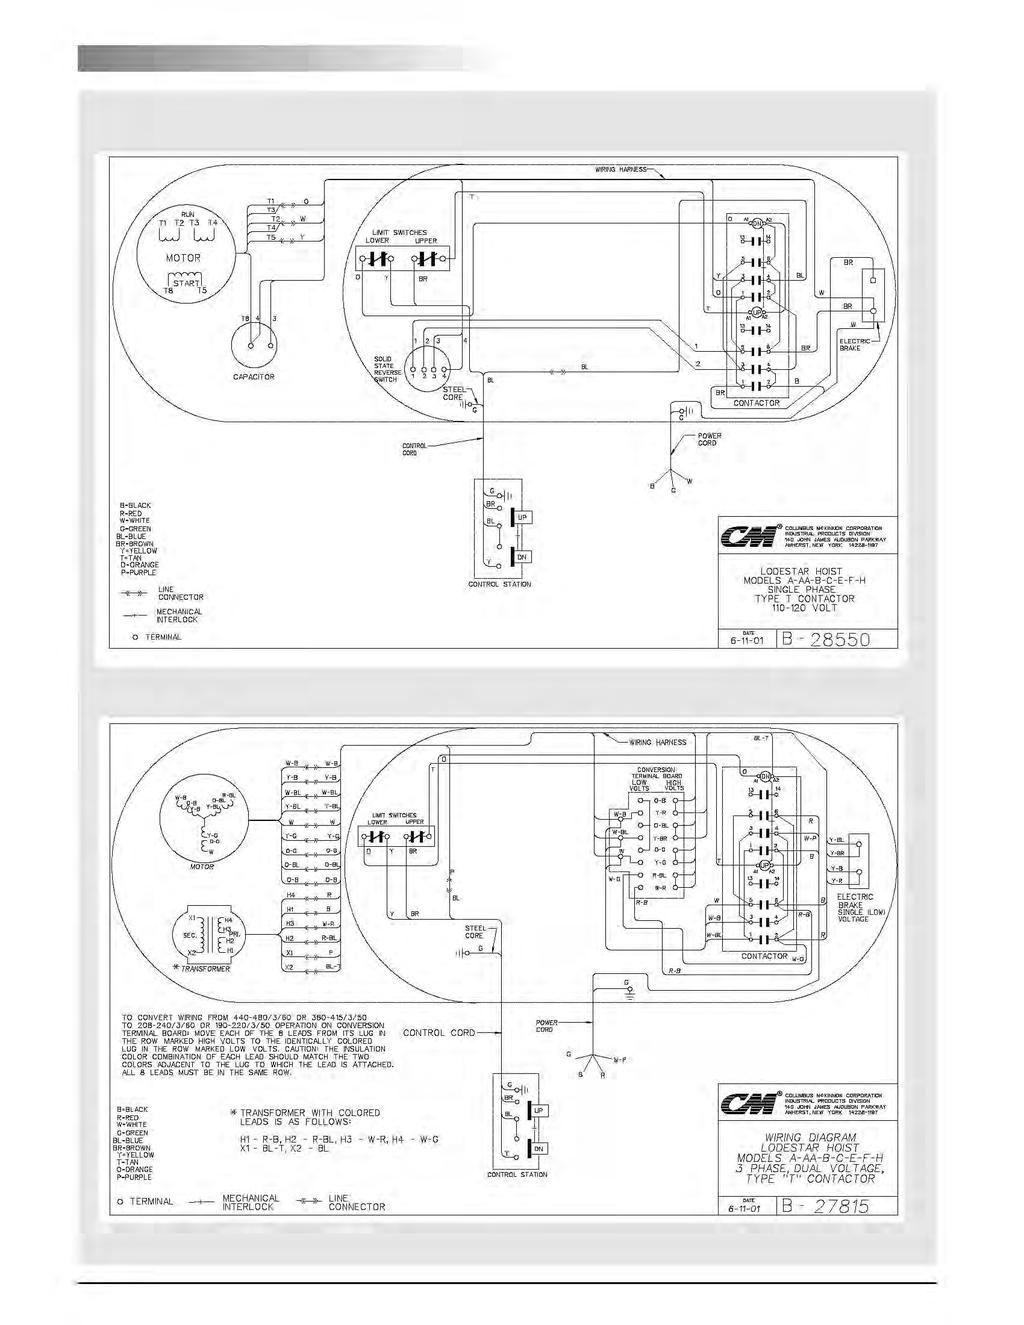 24 Figure 8. Typical Wiring Diagrams Wiring Diagrams shown are representative. Consult diagram in hoist or furnished with unit. ;- POWER I CORD B-BLACK R-RED 'III-WHITE G-GR EEN EJ..-8LL.